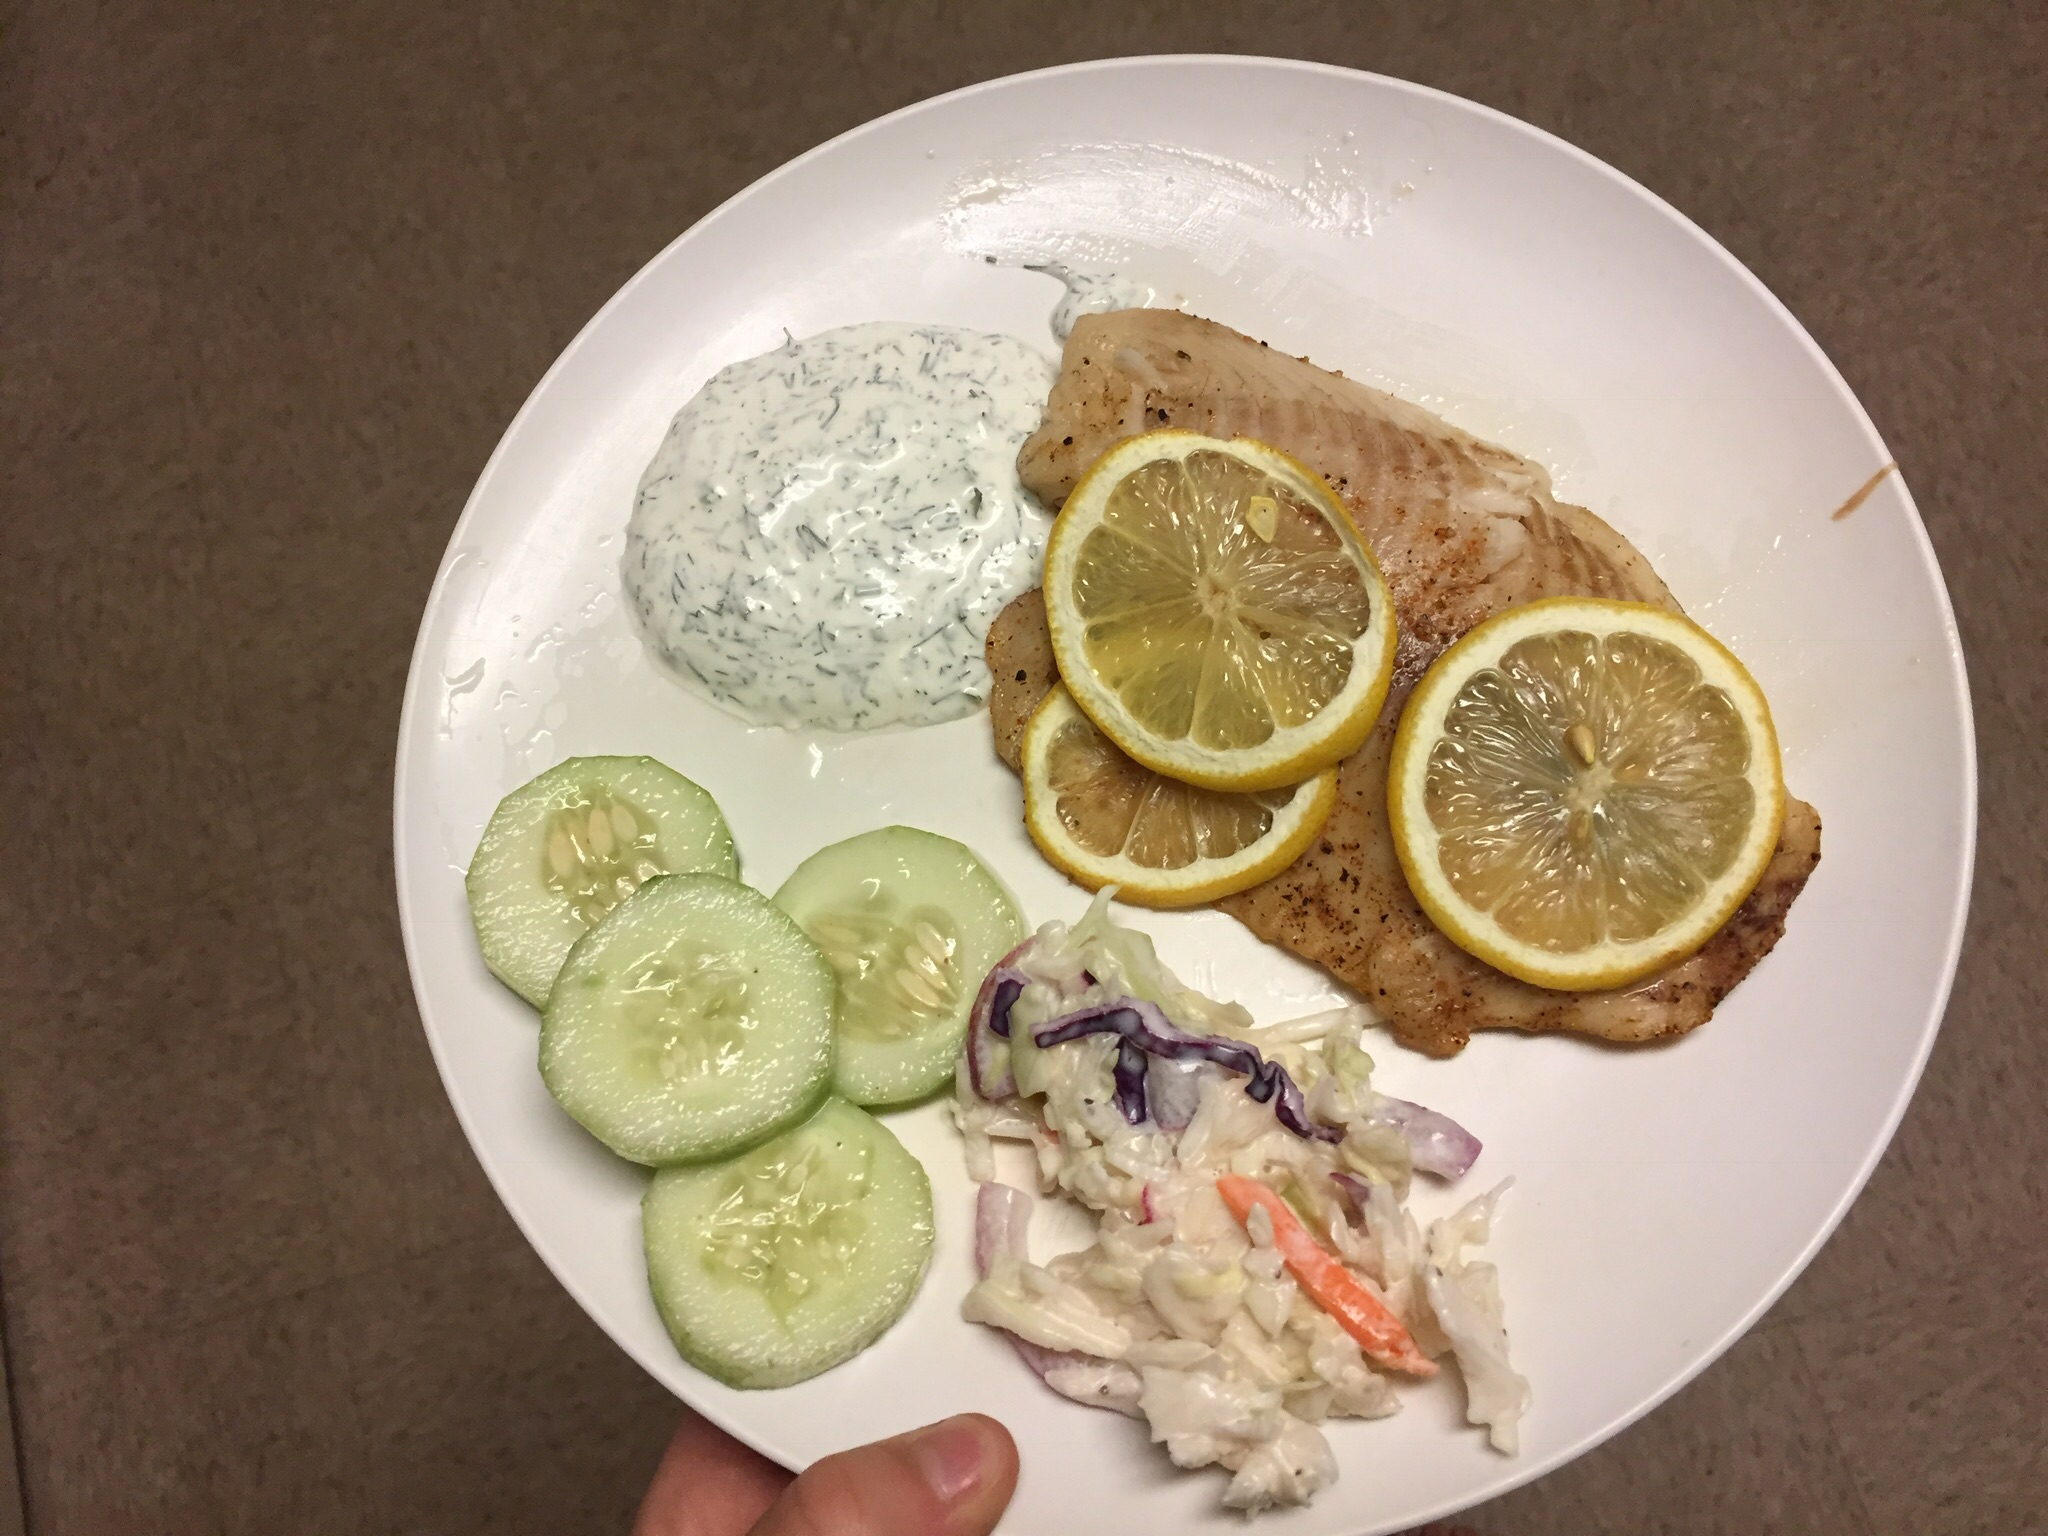 Hudson's Baked Tilapia with Dill Sauce 